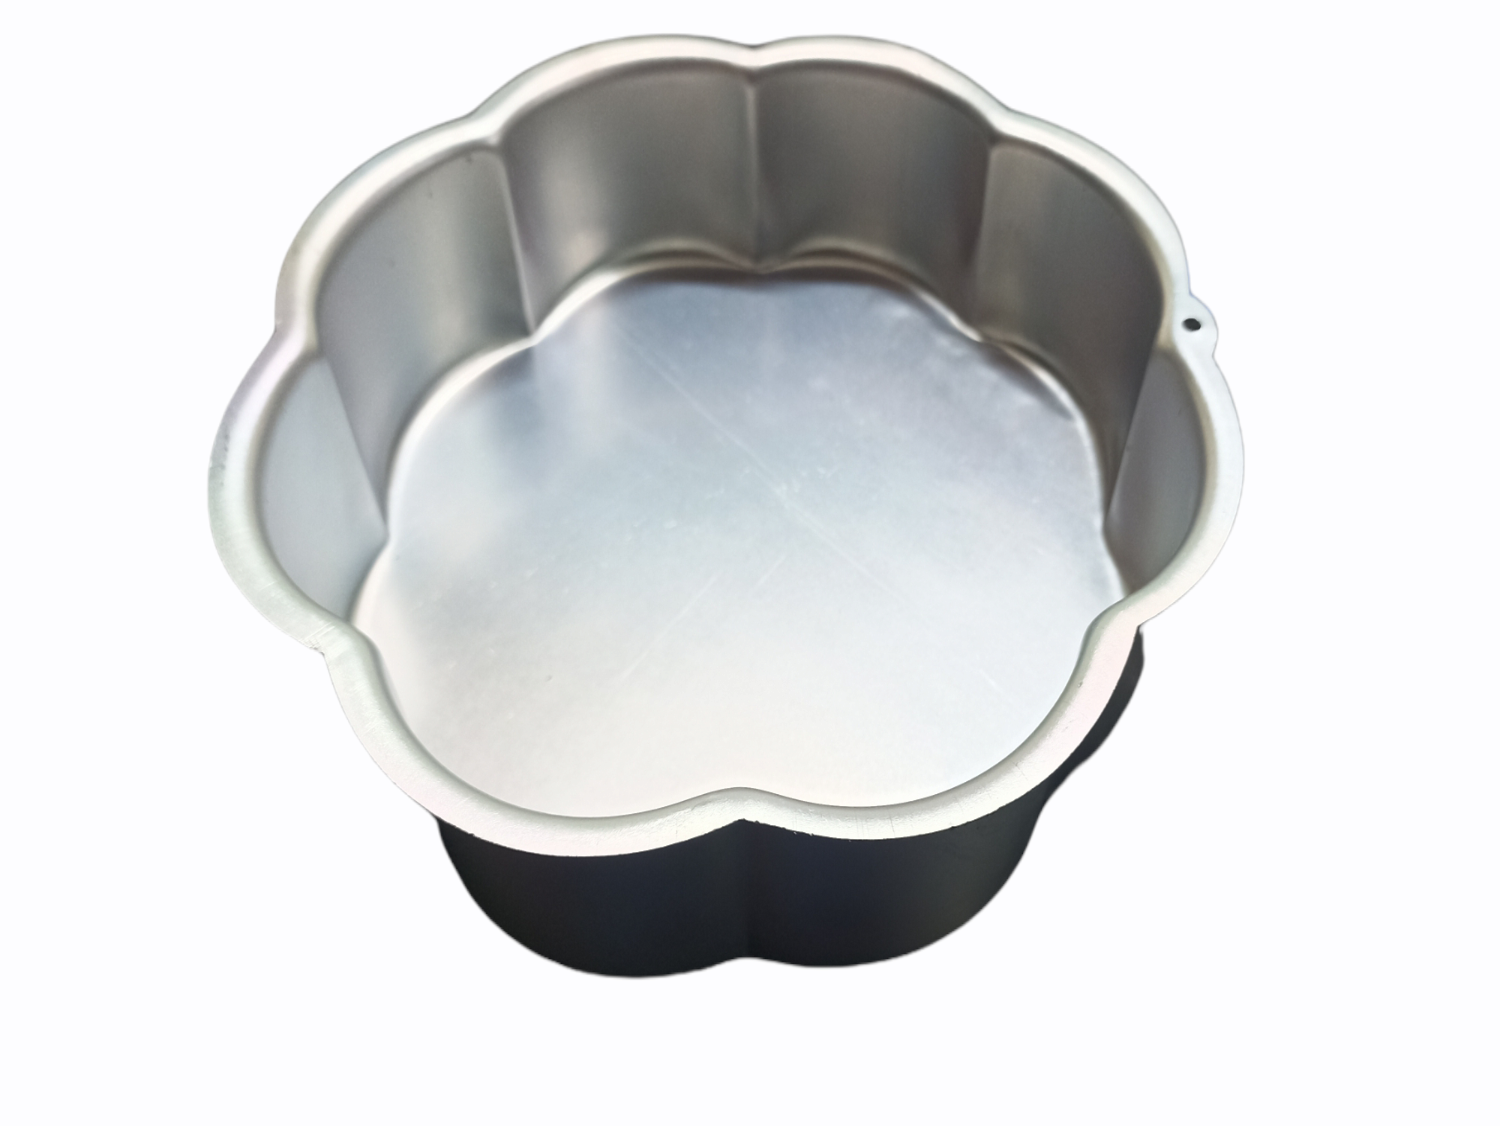 Buy Hua You Cast Iron Cake Mould Online at Low Prices in India - Amazon.in